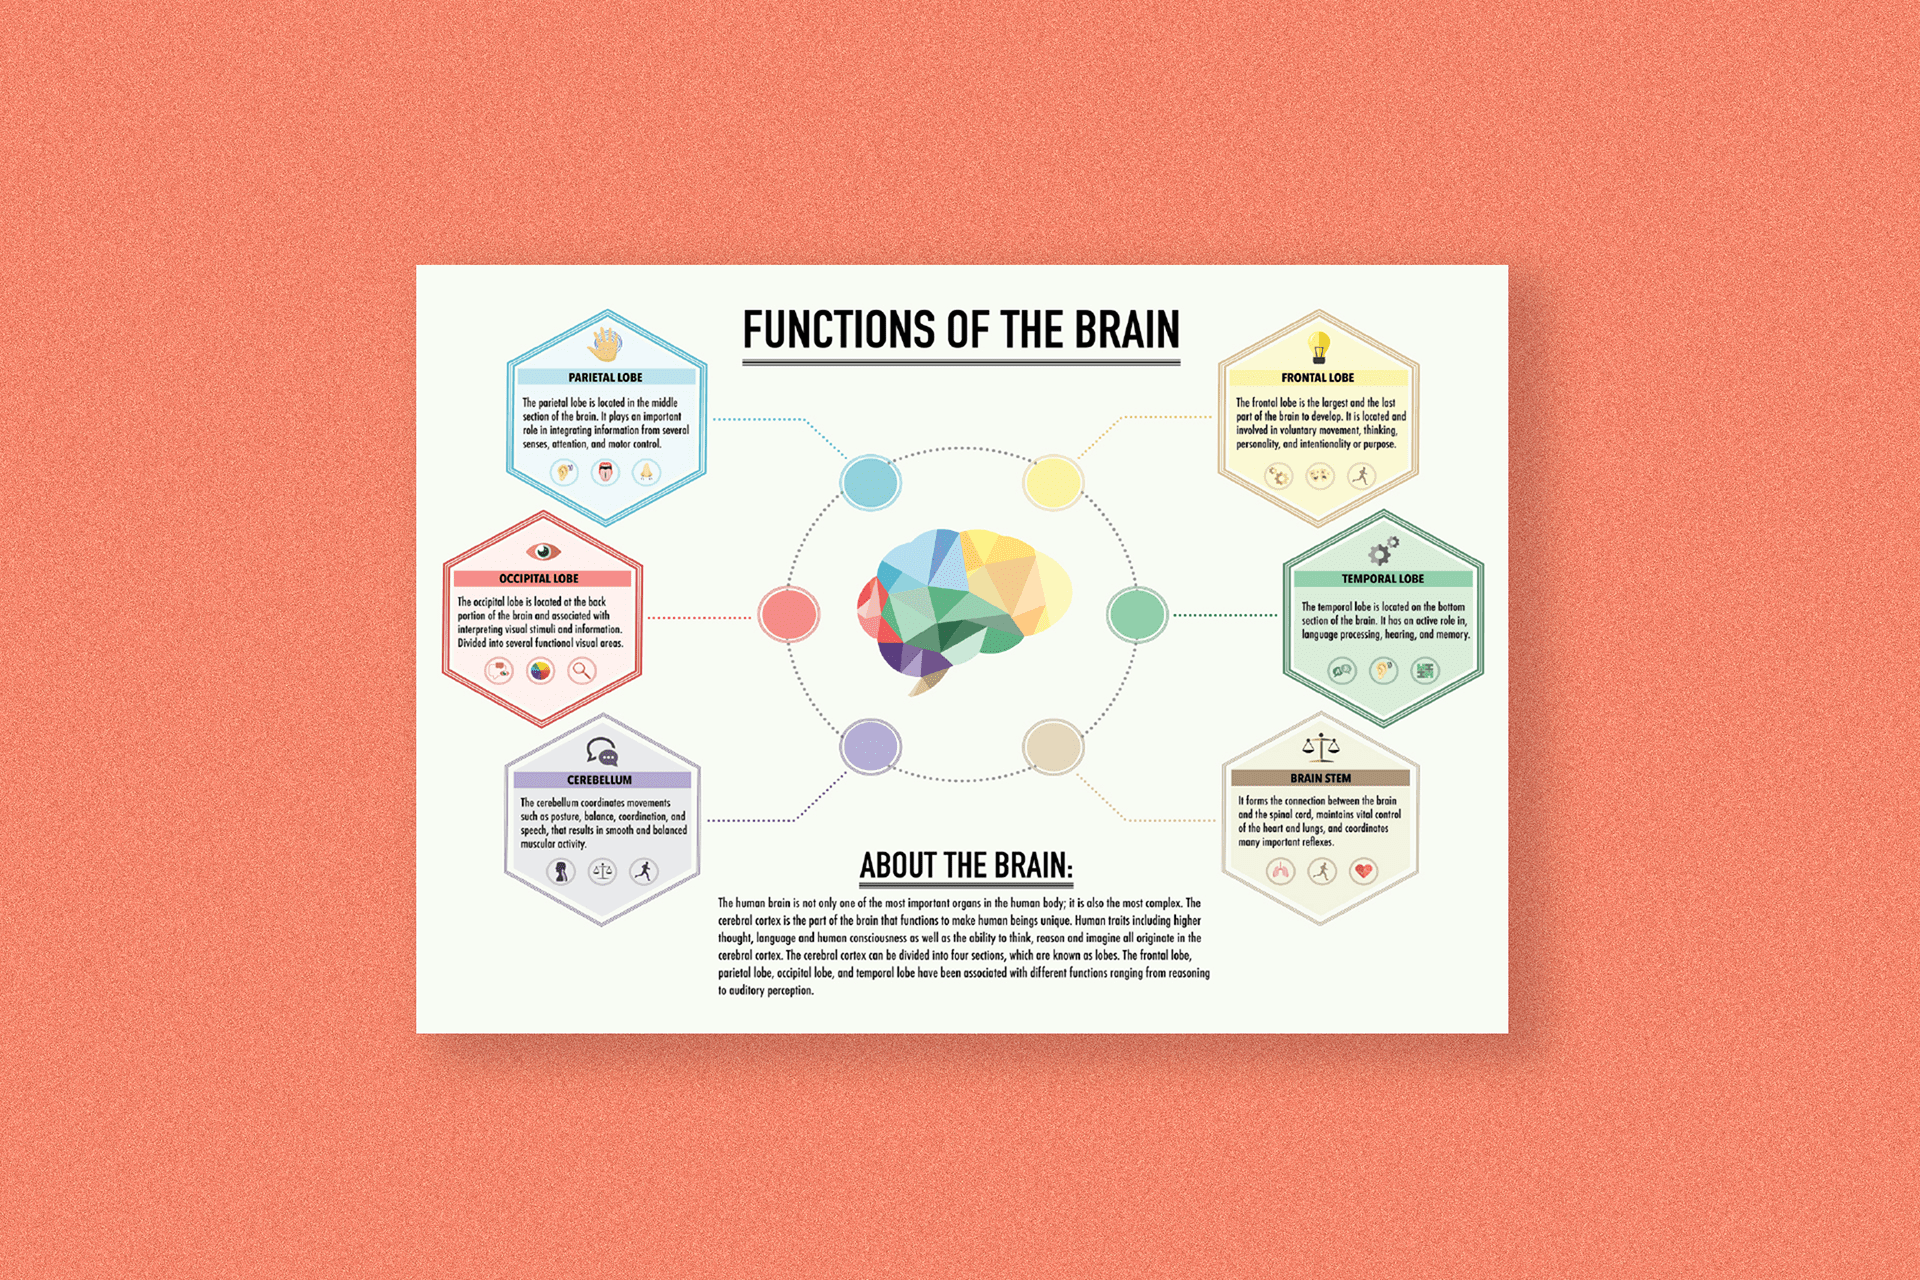 Functions of the Brain Infographic